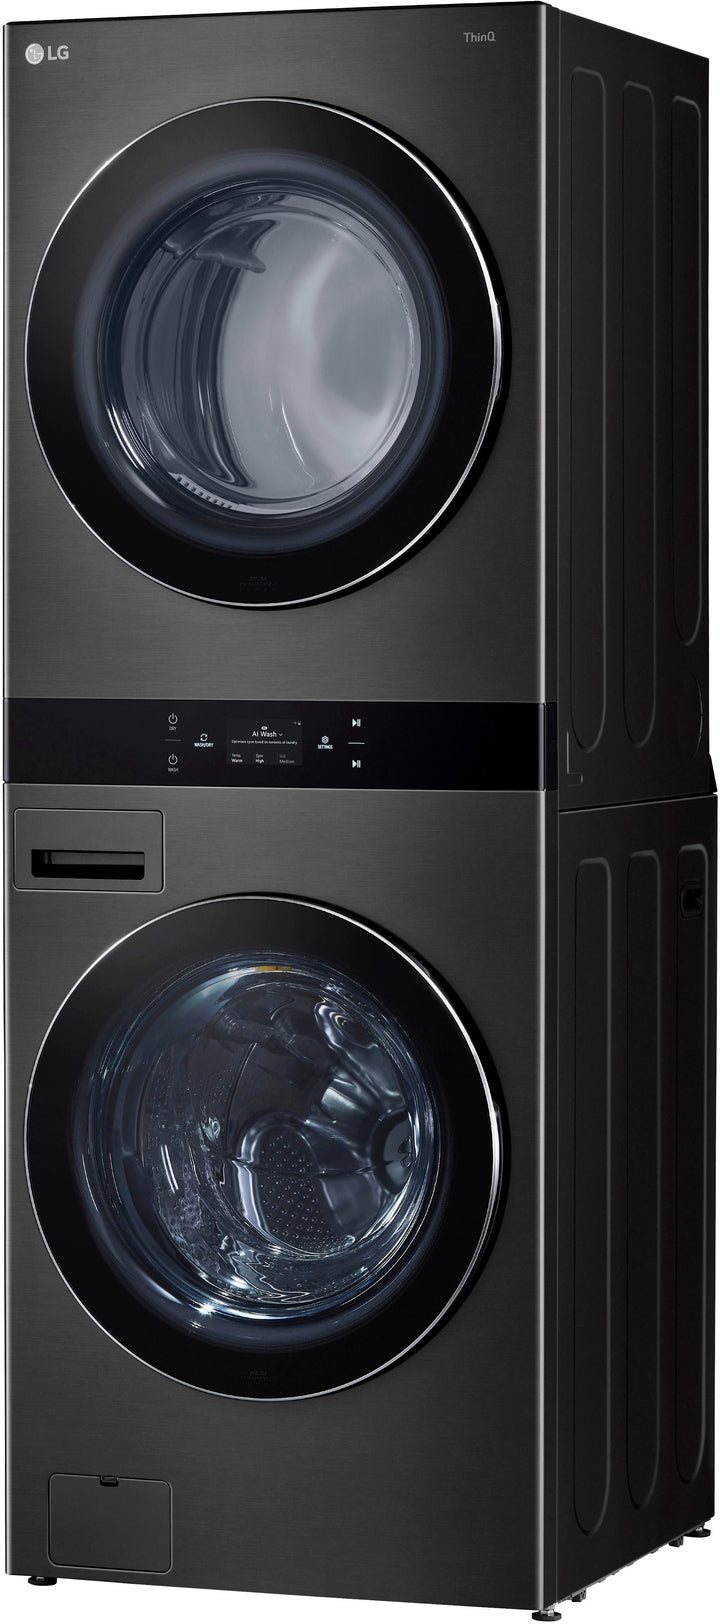 LG - 5.0 Cu. Ft. HE Smart Front Load Washer and 7.4 Cu. Ft. Gas Dryer WashTower with Steam and Center Control - Black Steel_2